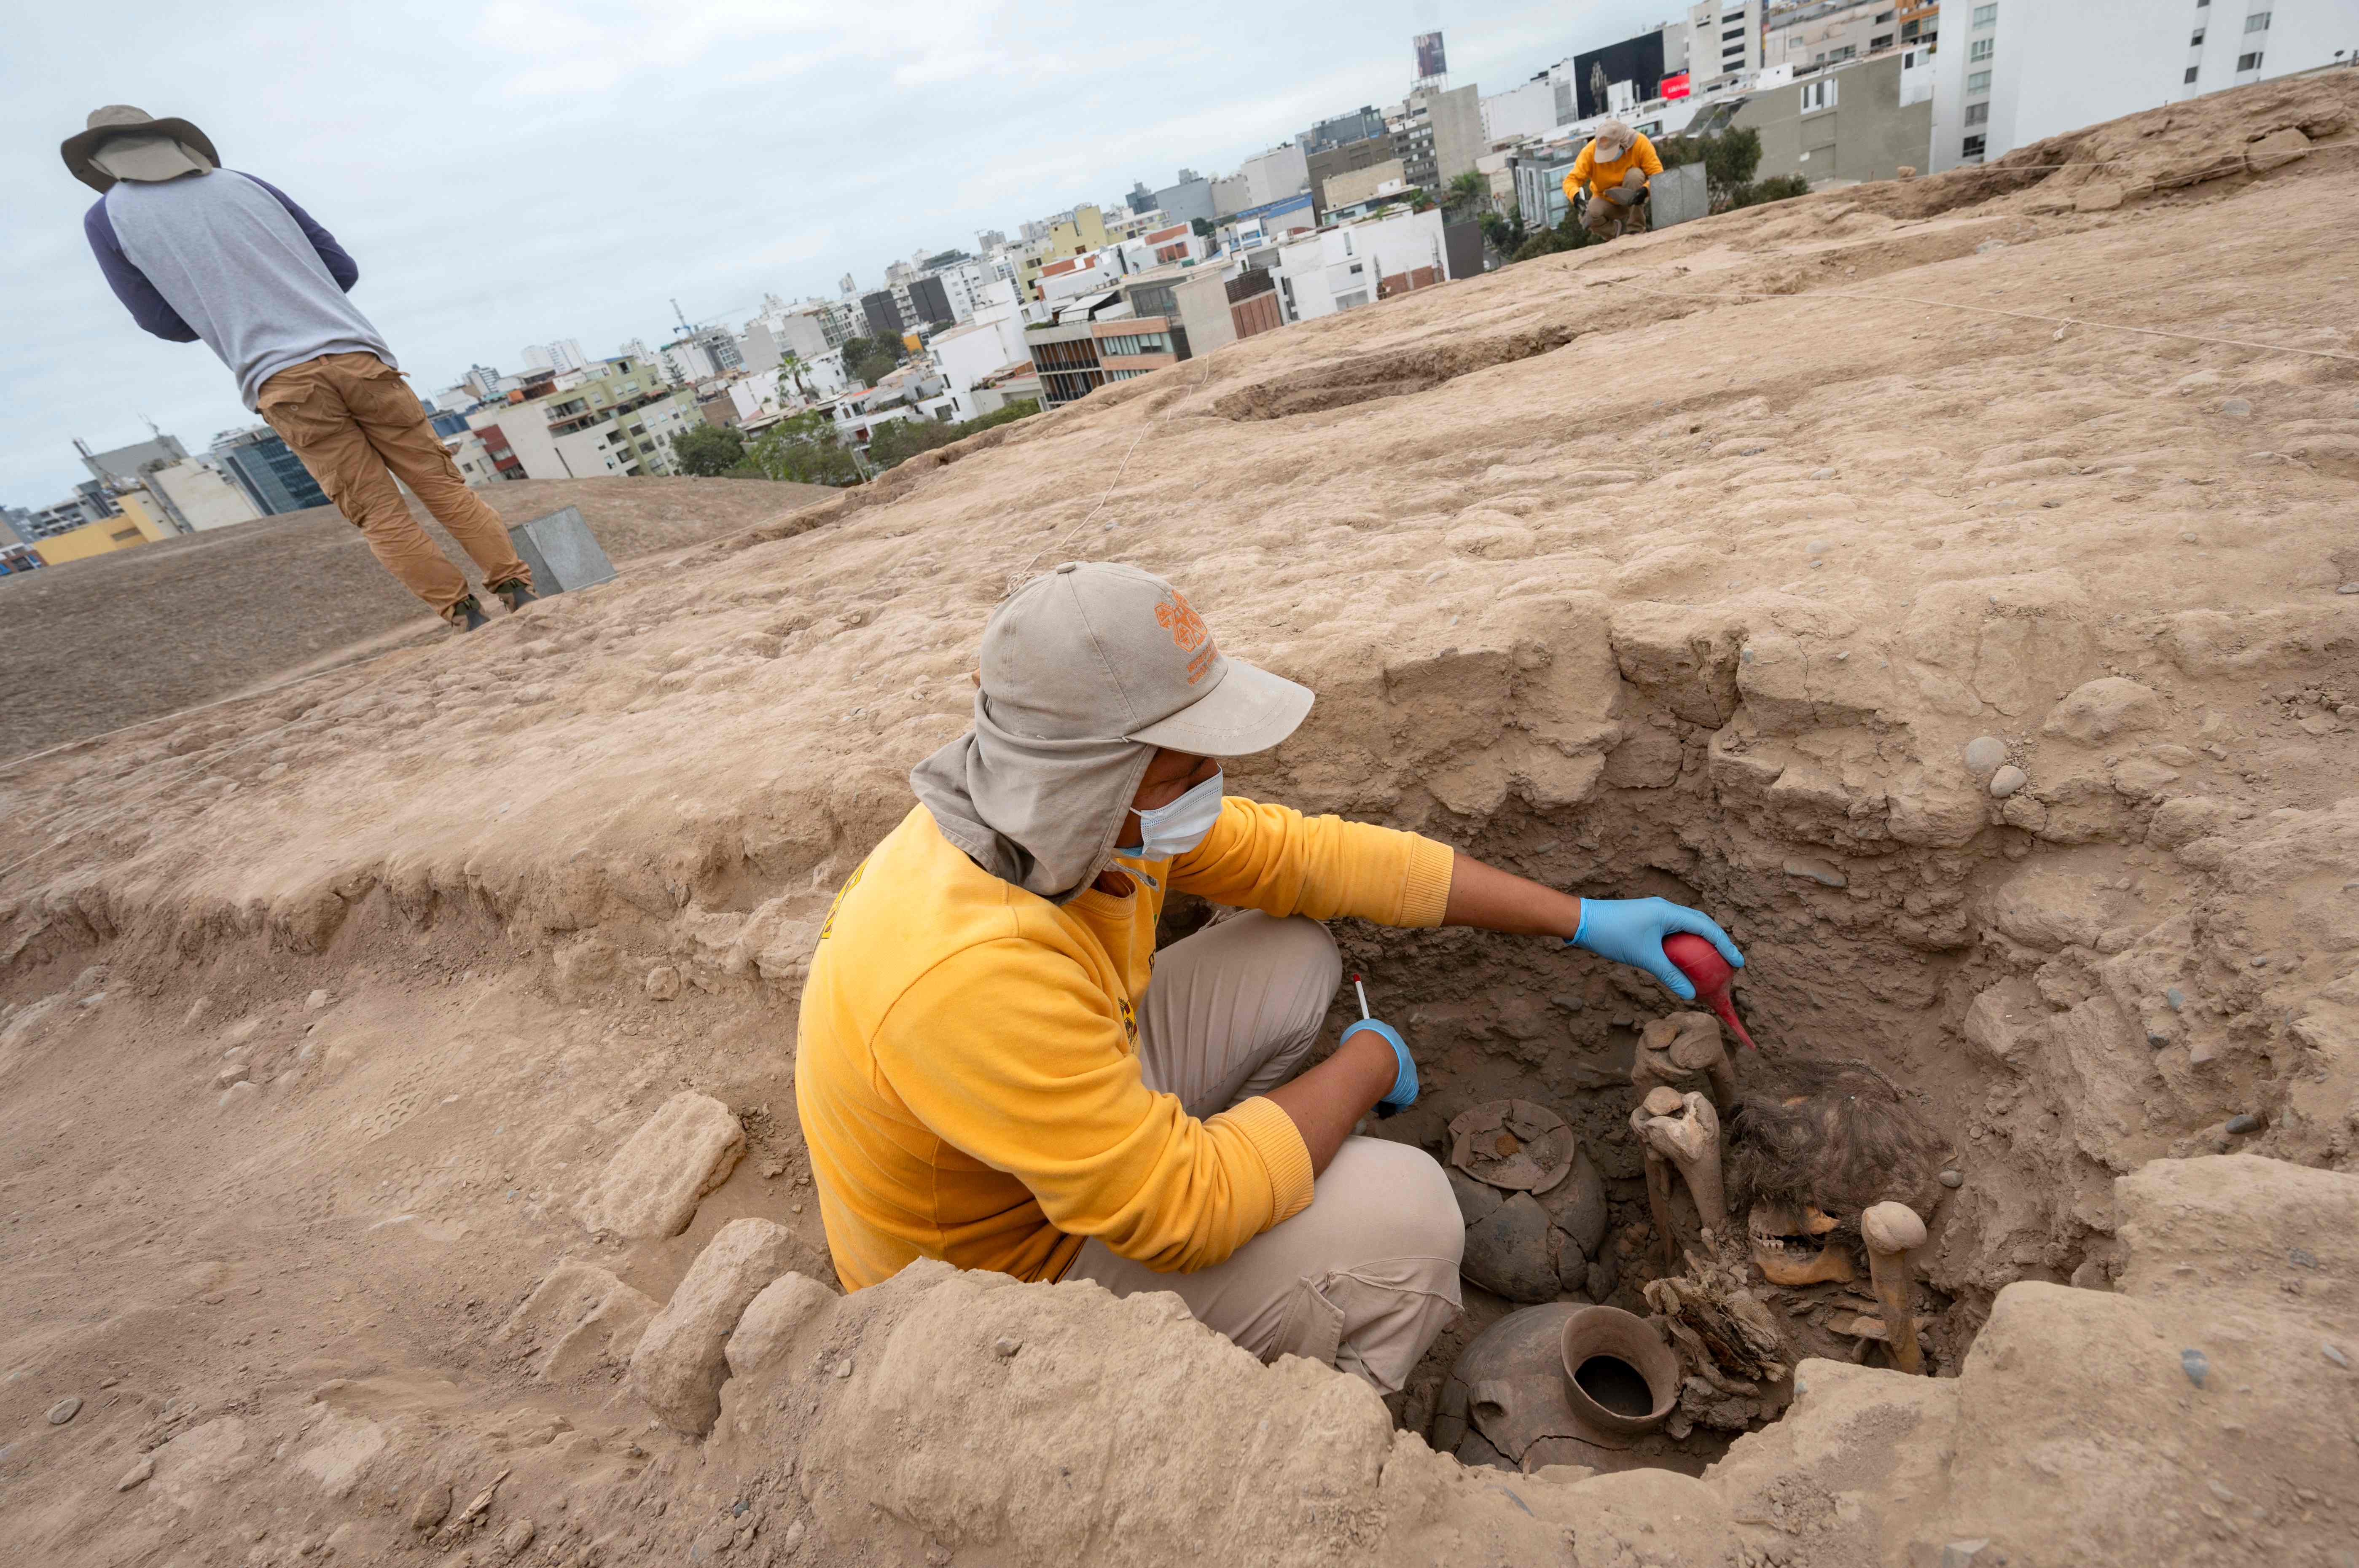 1,000-year-old mummy with long brown hair discovered in Peru